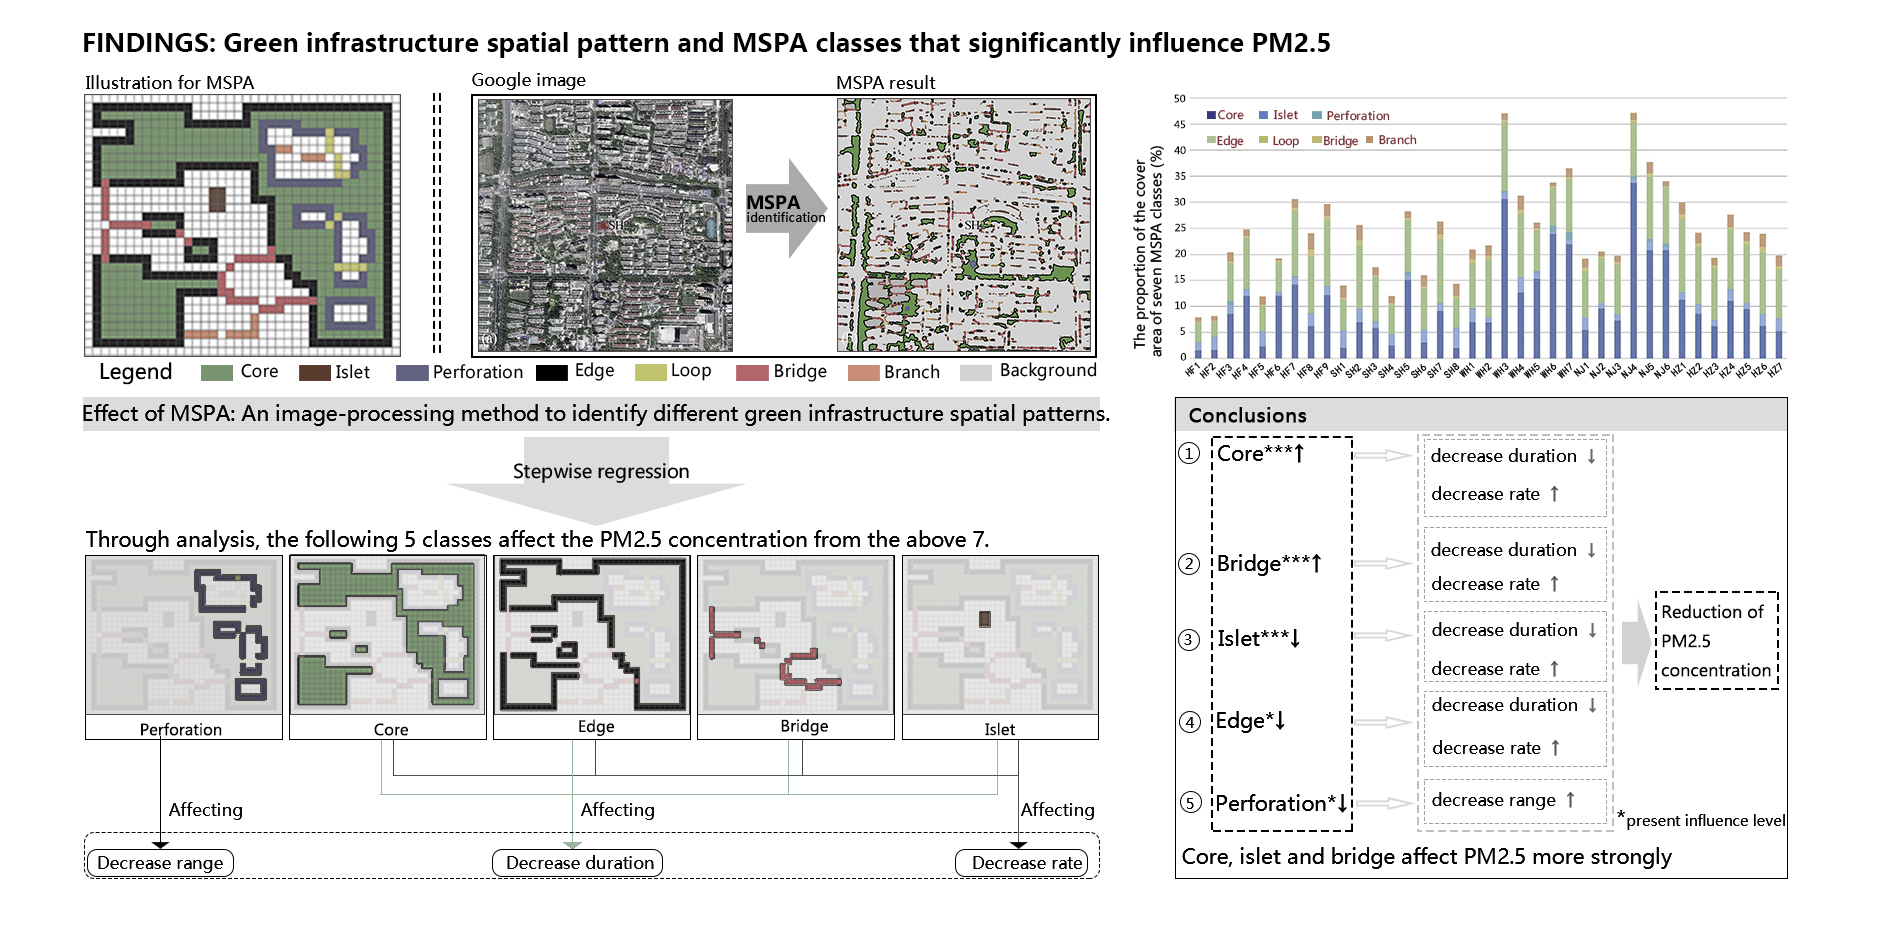 Findings: Green infrastructure spatial pattern and MSPA class that significantly influence PM2.5